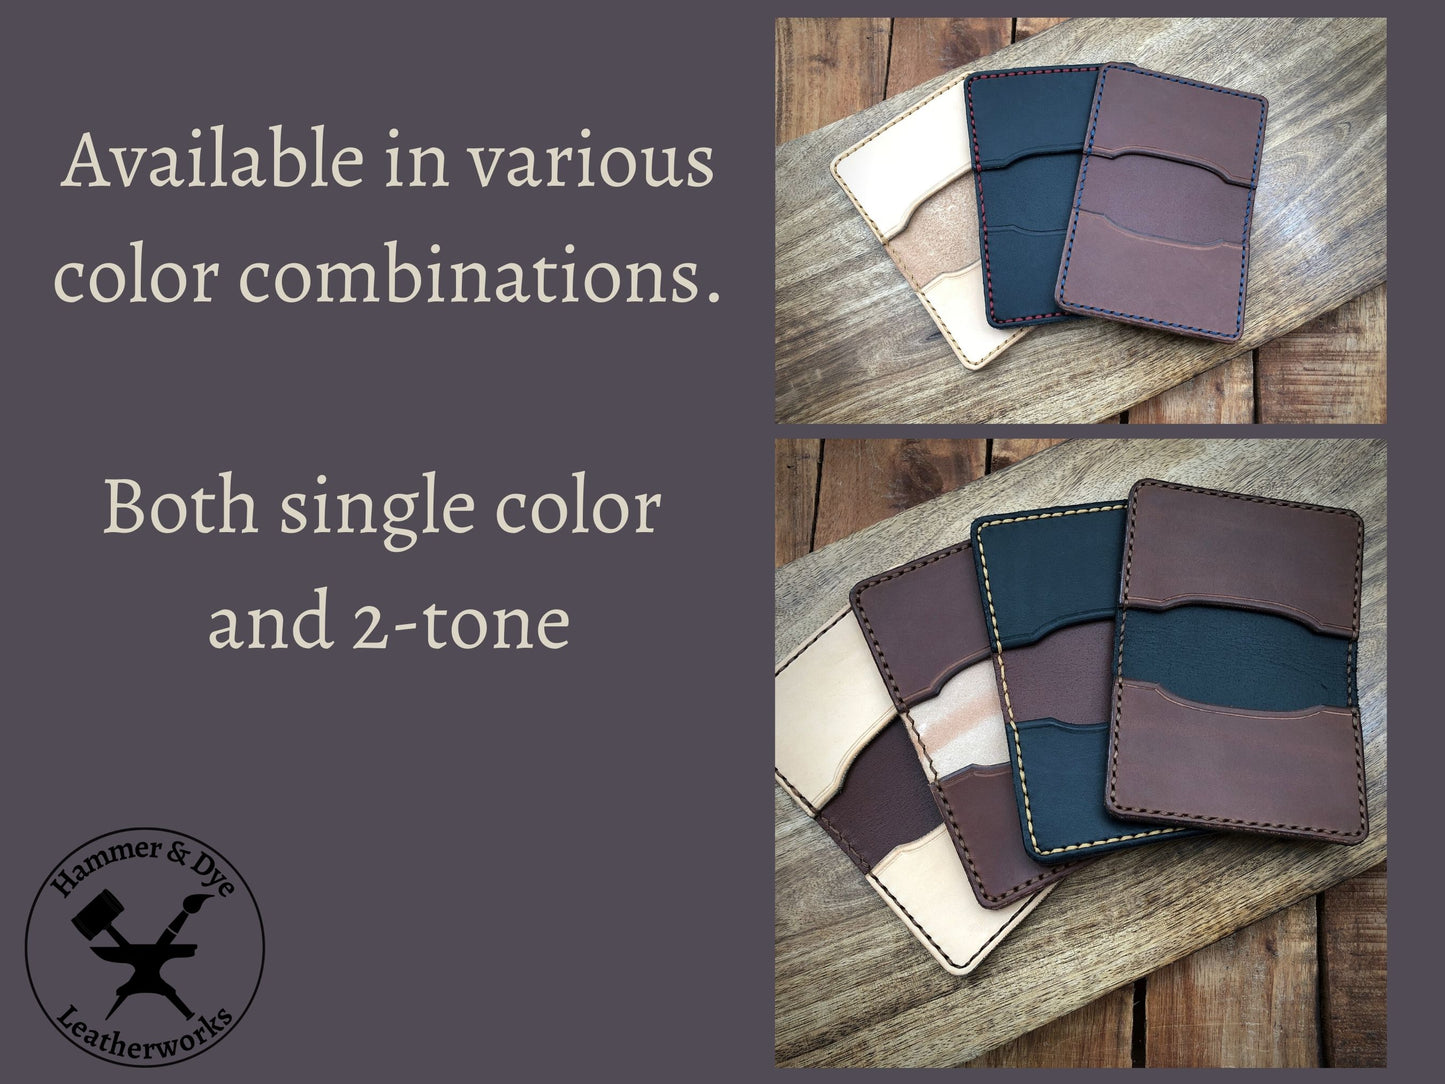 Available color combinations of the handmade leather bifold card wallet